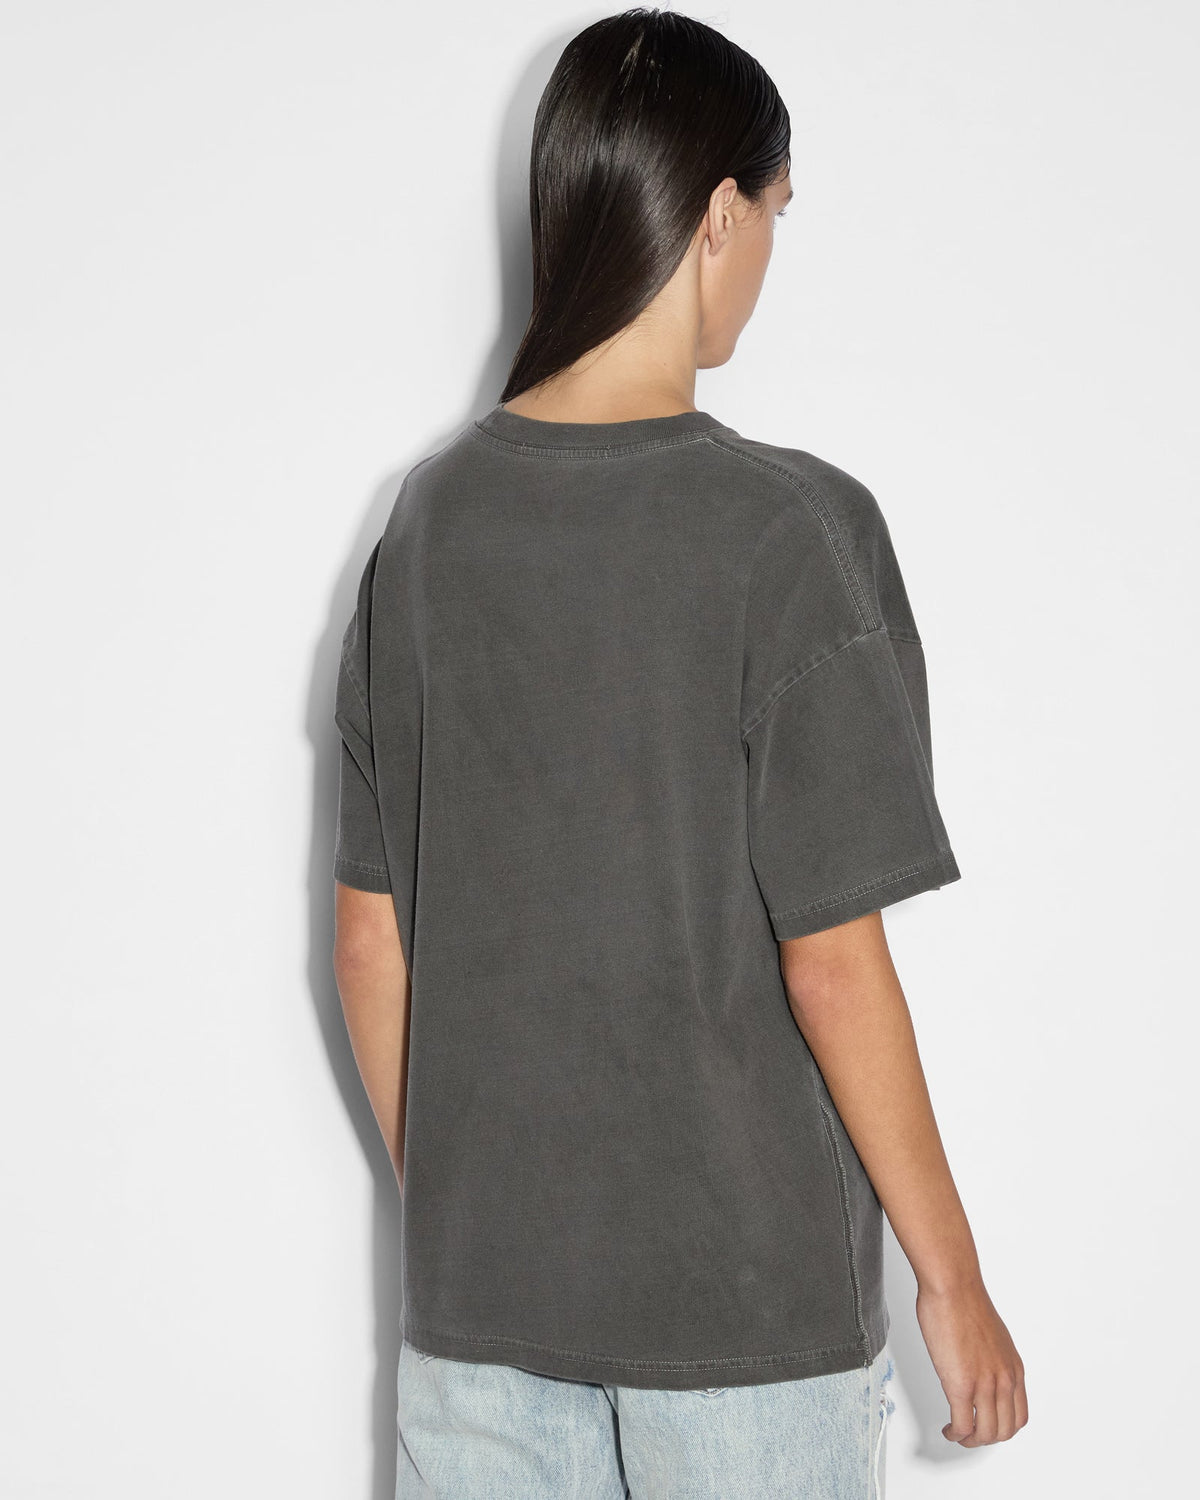 SINNER OH G SS TEE CHARCOAL